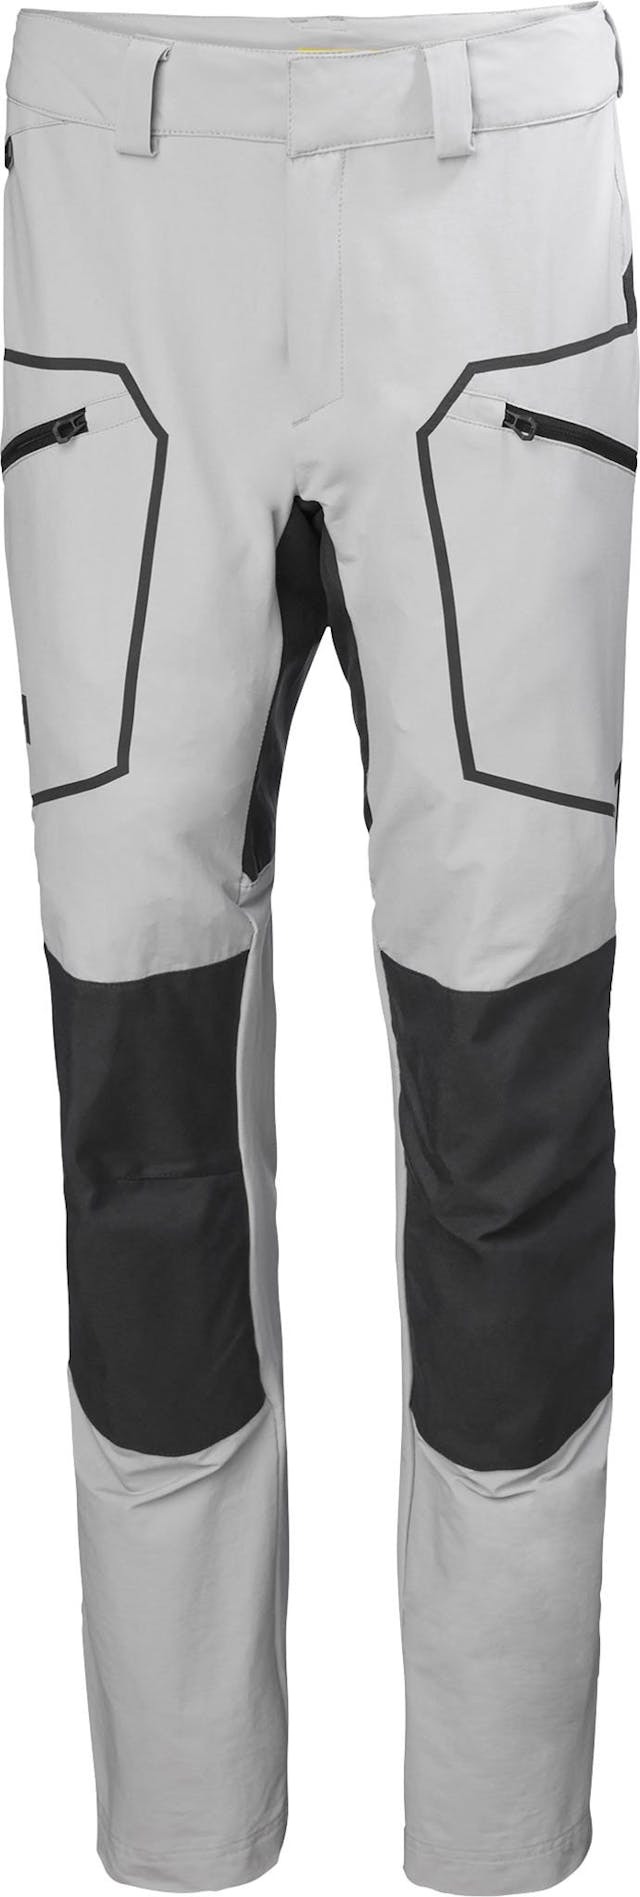 Product image for Hp Racing Deck Pant - Women's